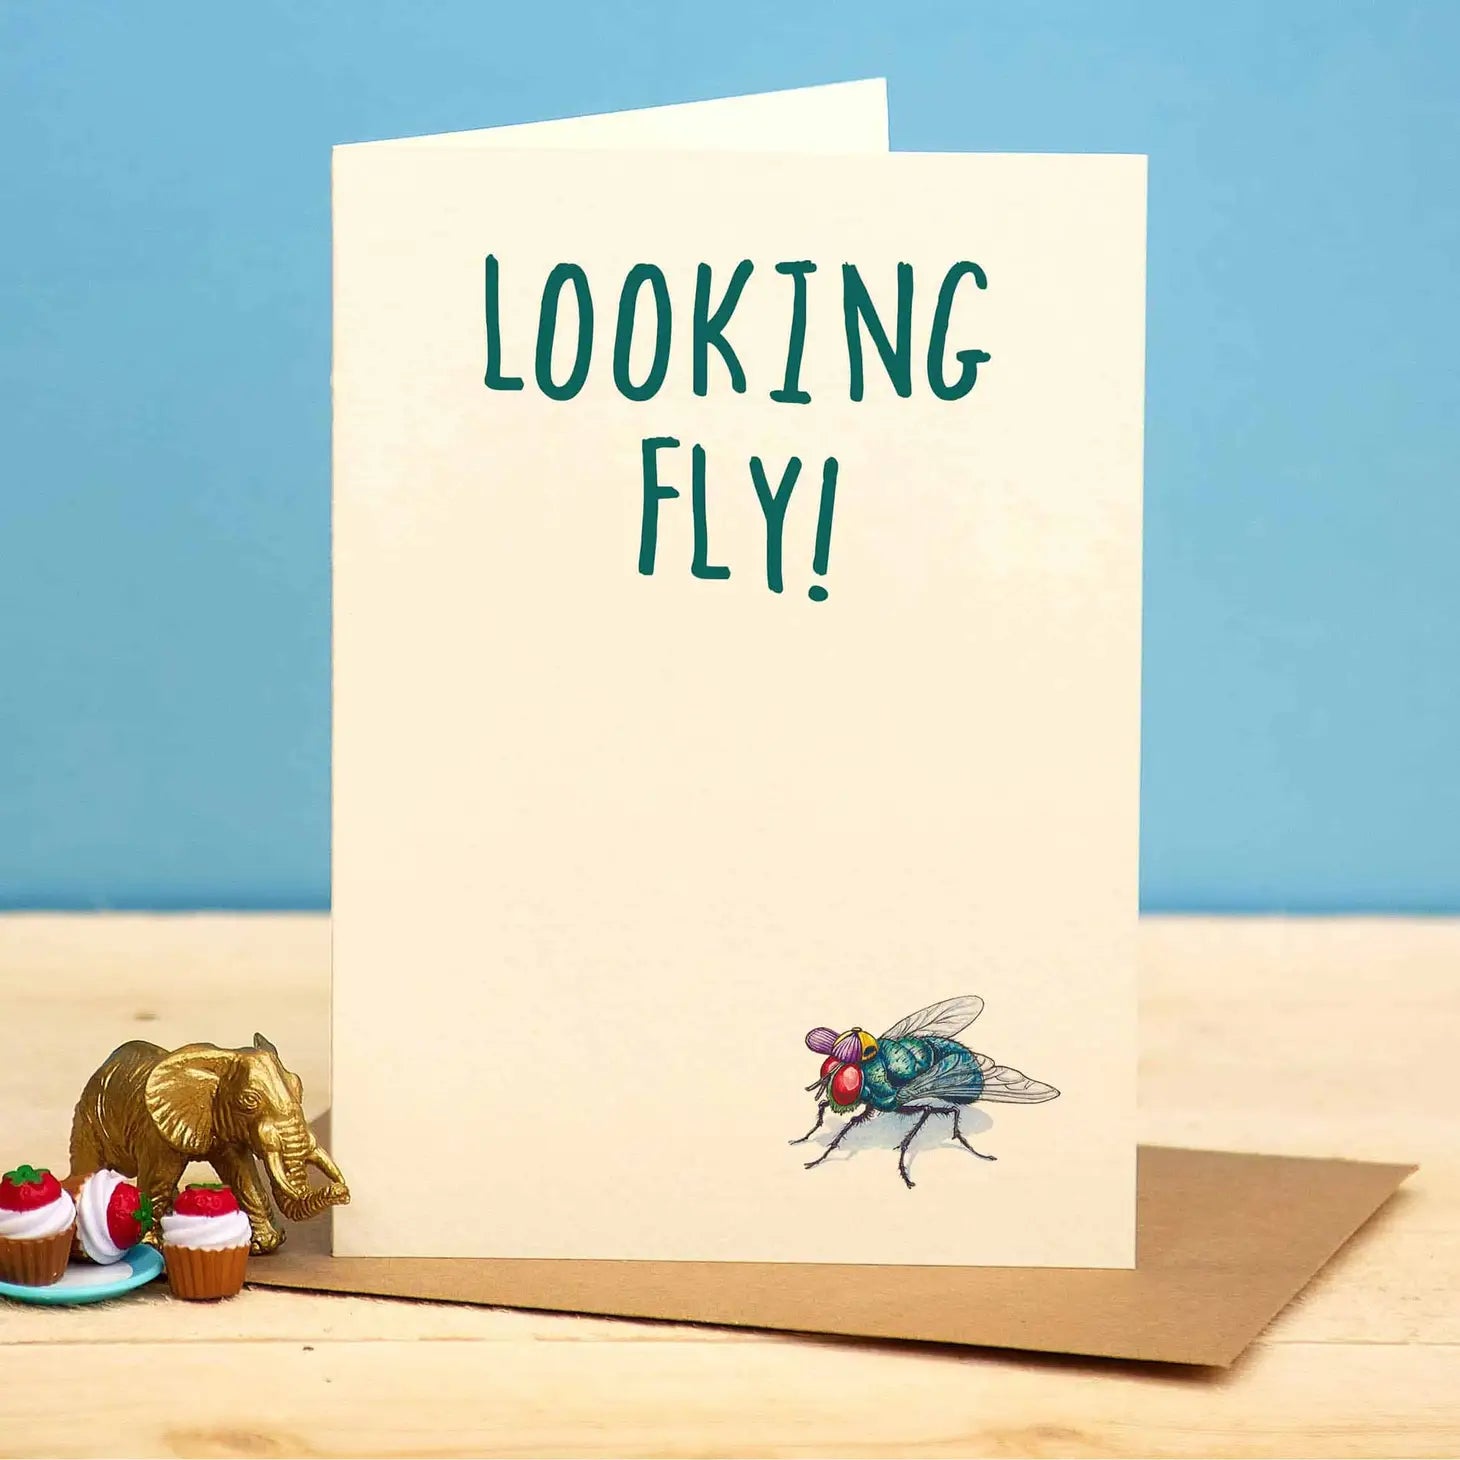 Greeting card fly "Looking fly"